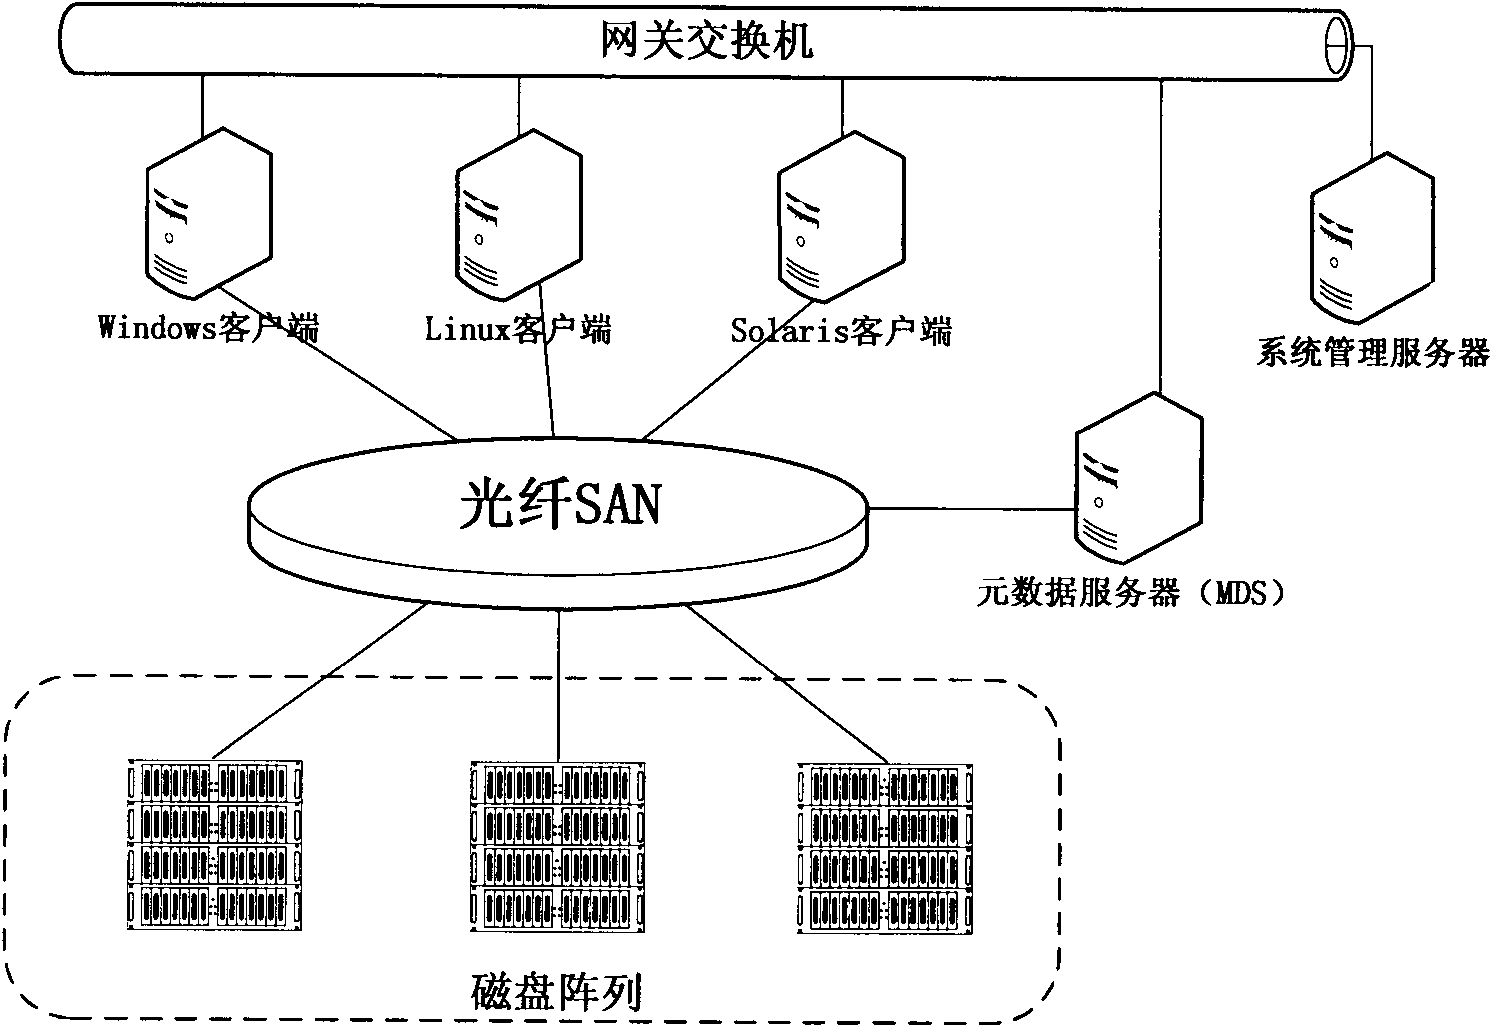 Method for allocating mass storage resources according to needs in heterogeneous SAN (Storage Area Network) environment